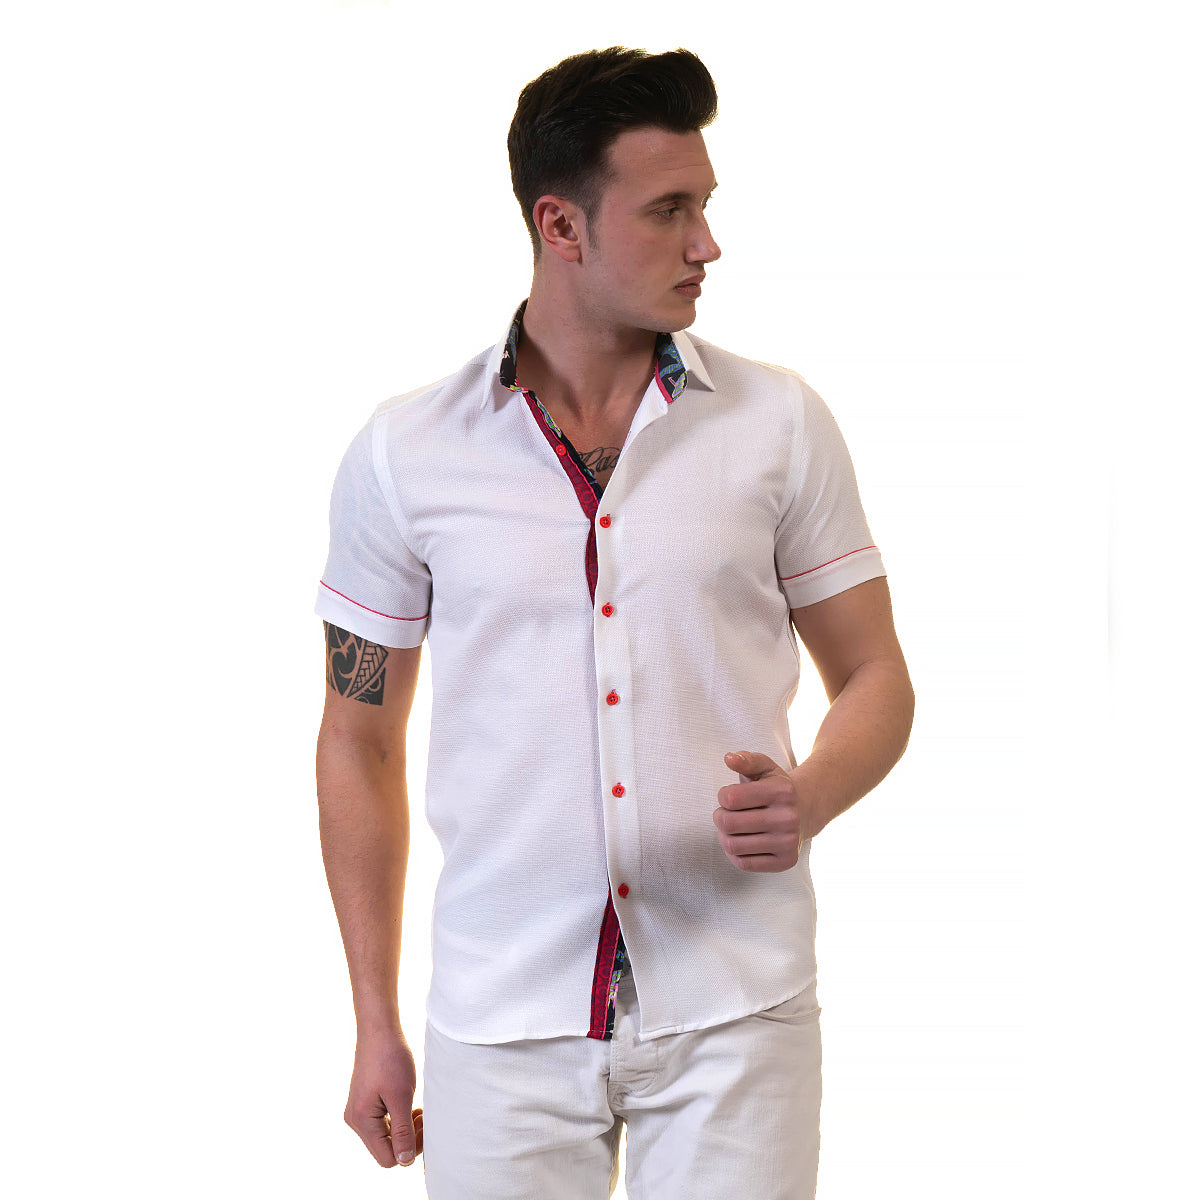 White and Red Mens Short Sleeve Button up Shirts - Tailored Slim Fit Cotton Dress Shirts